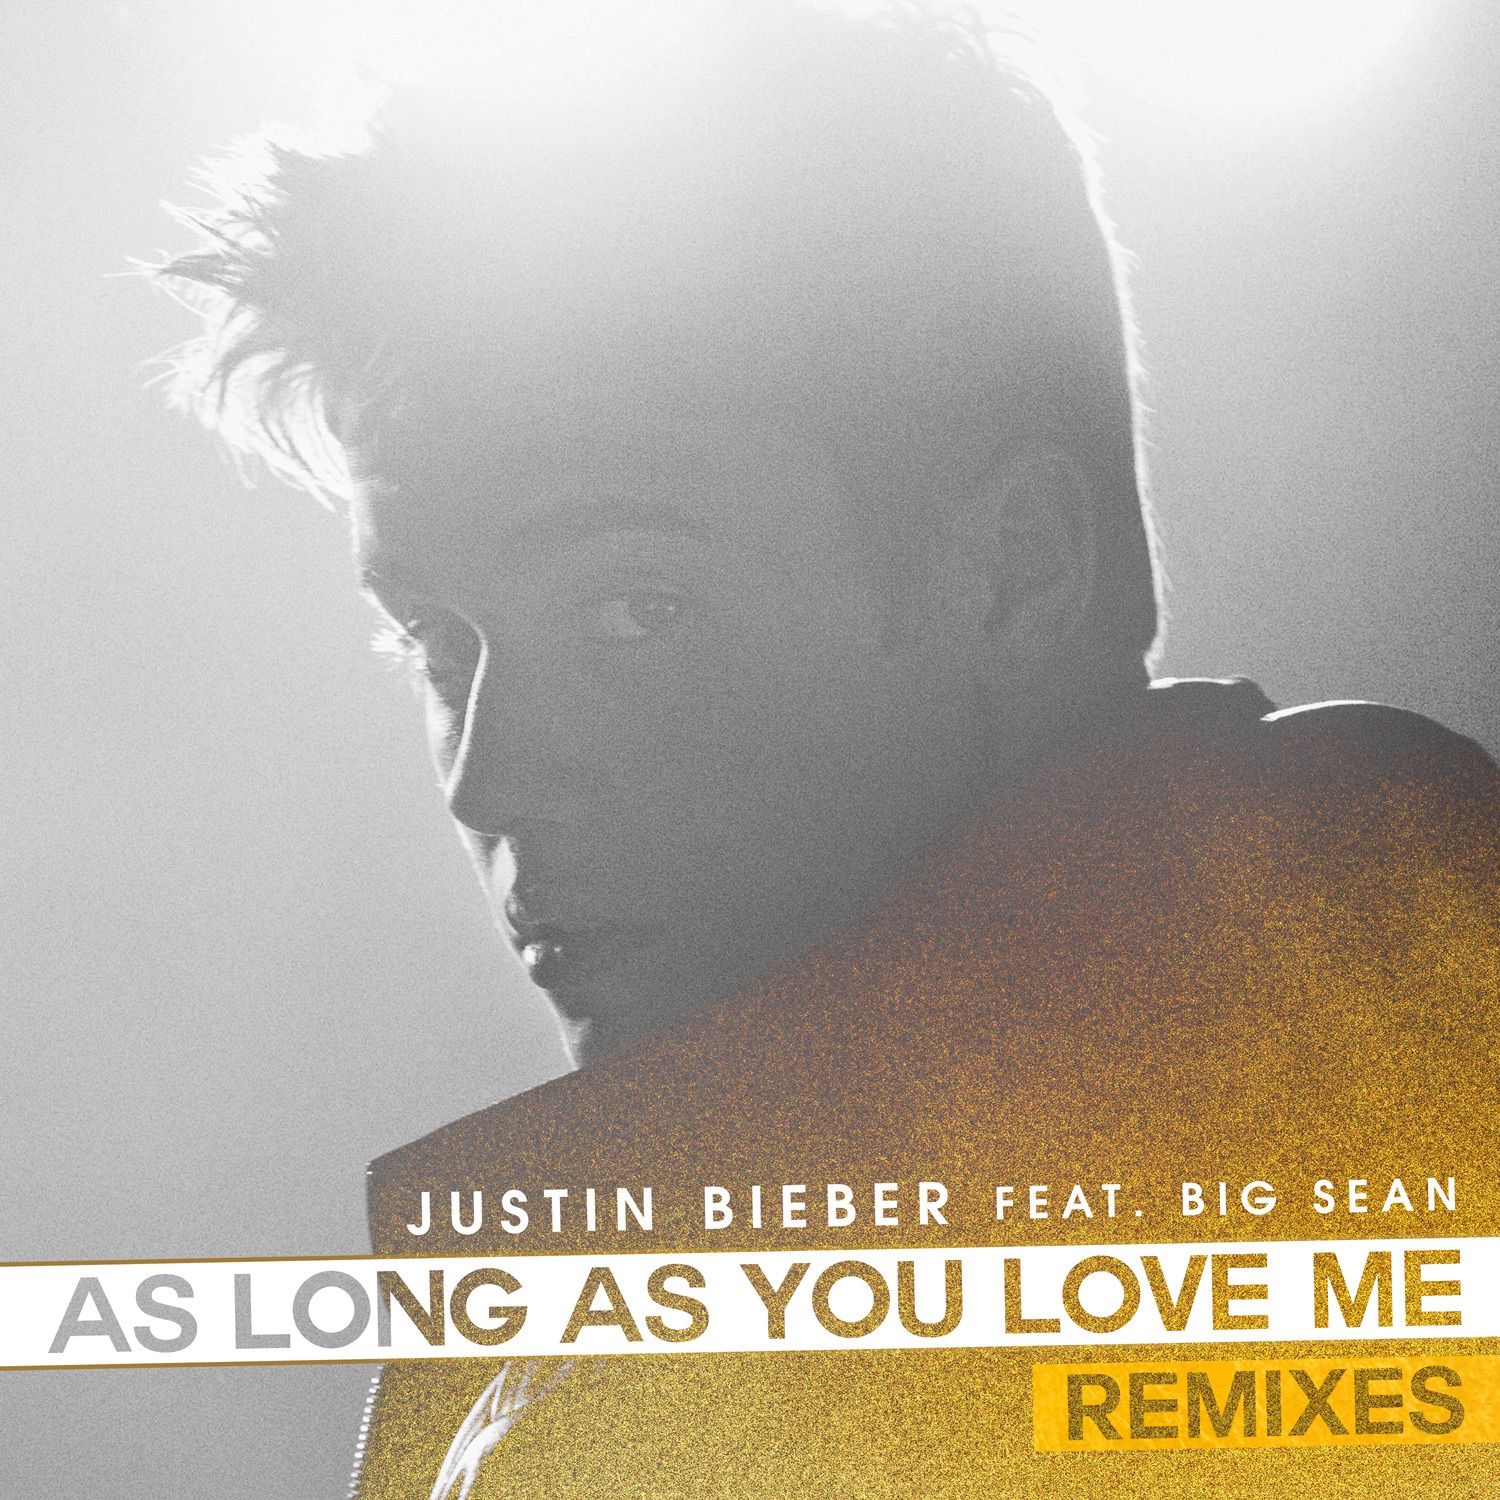 youtube cover just as long as you love me